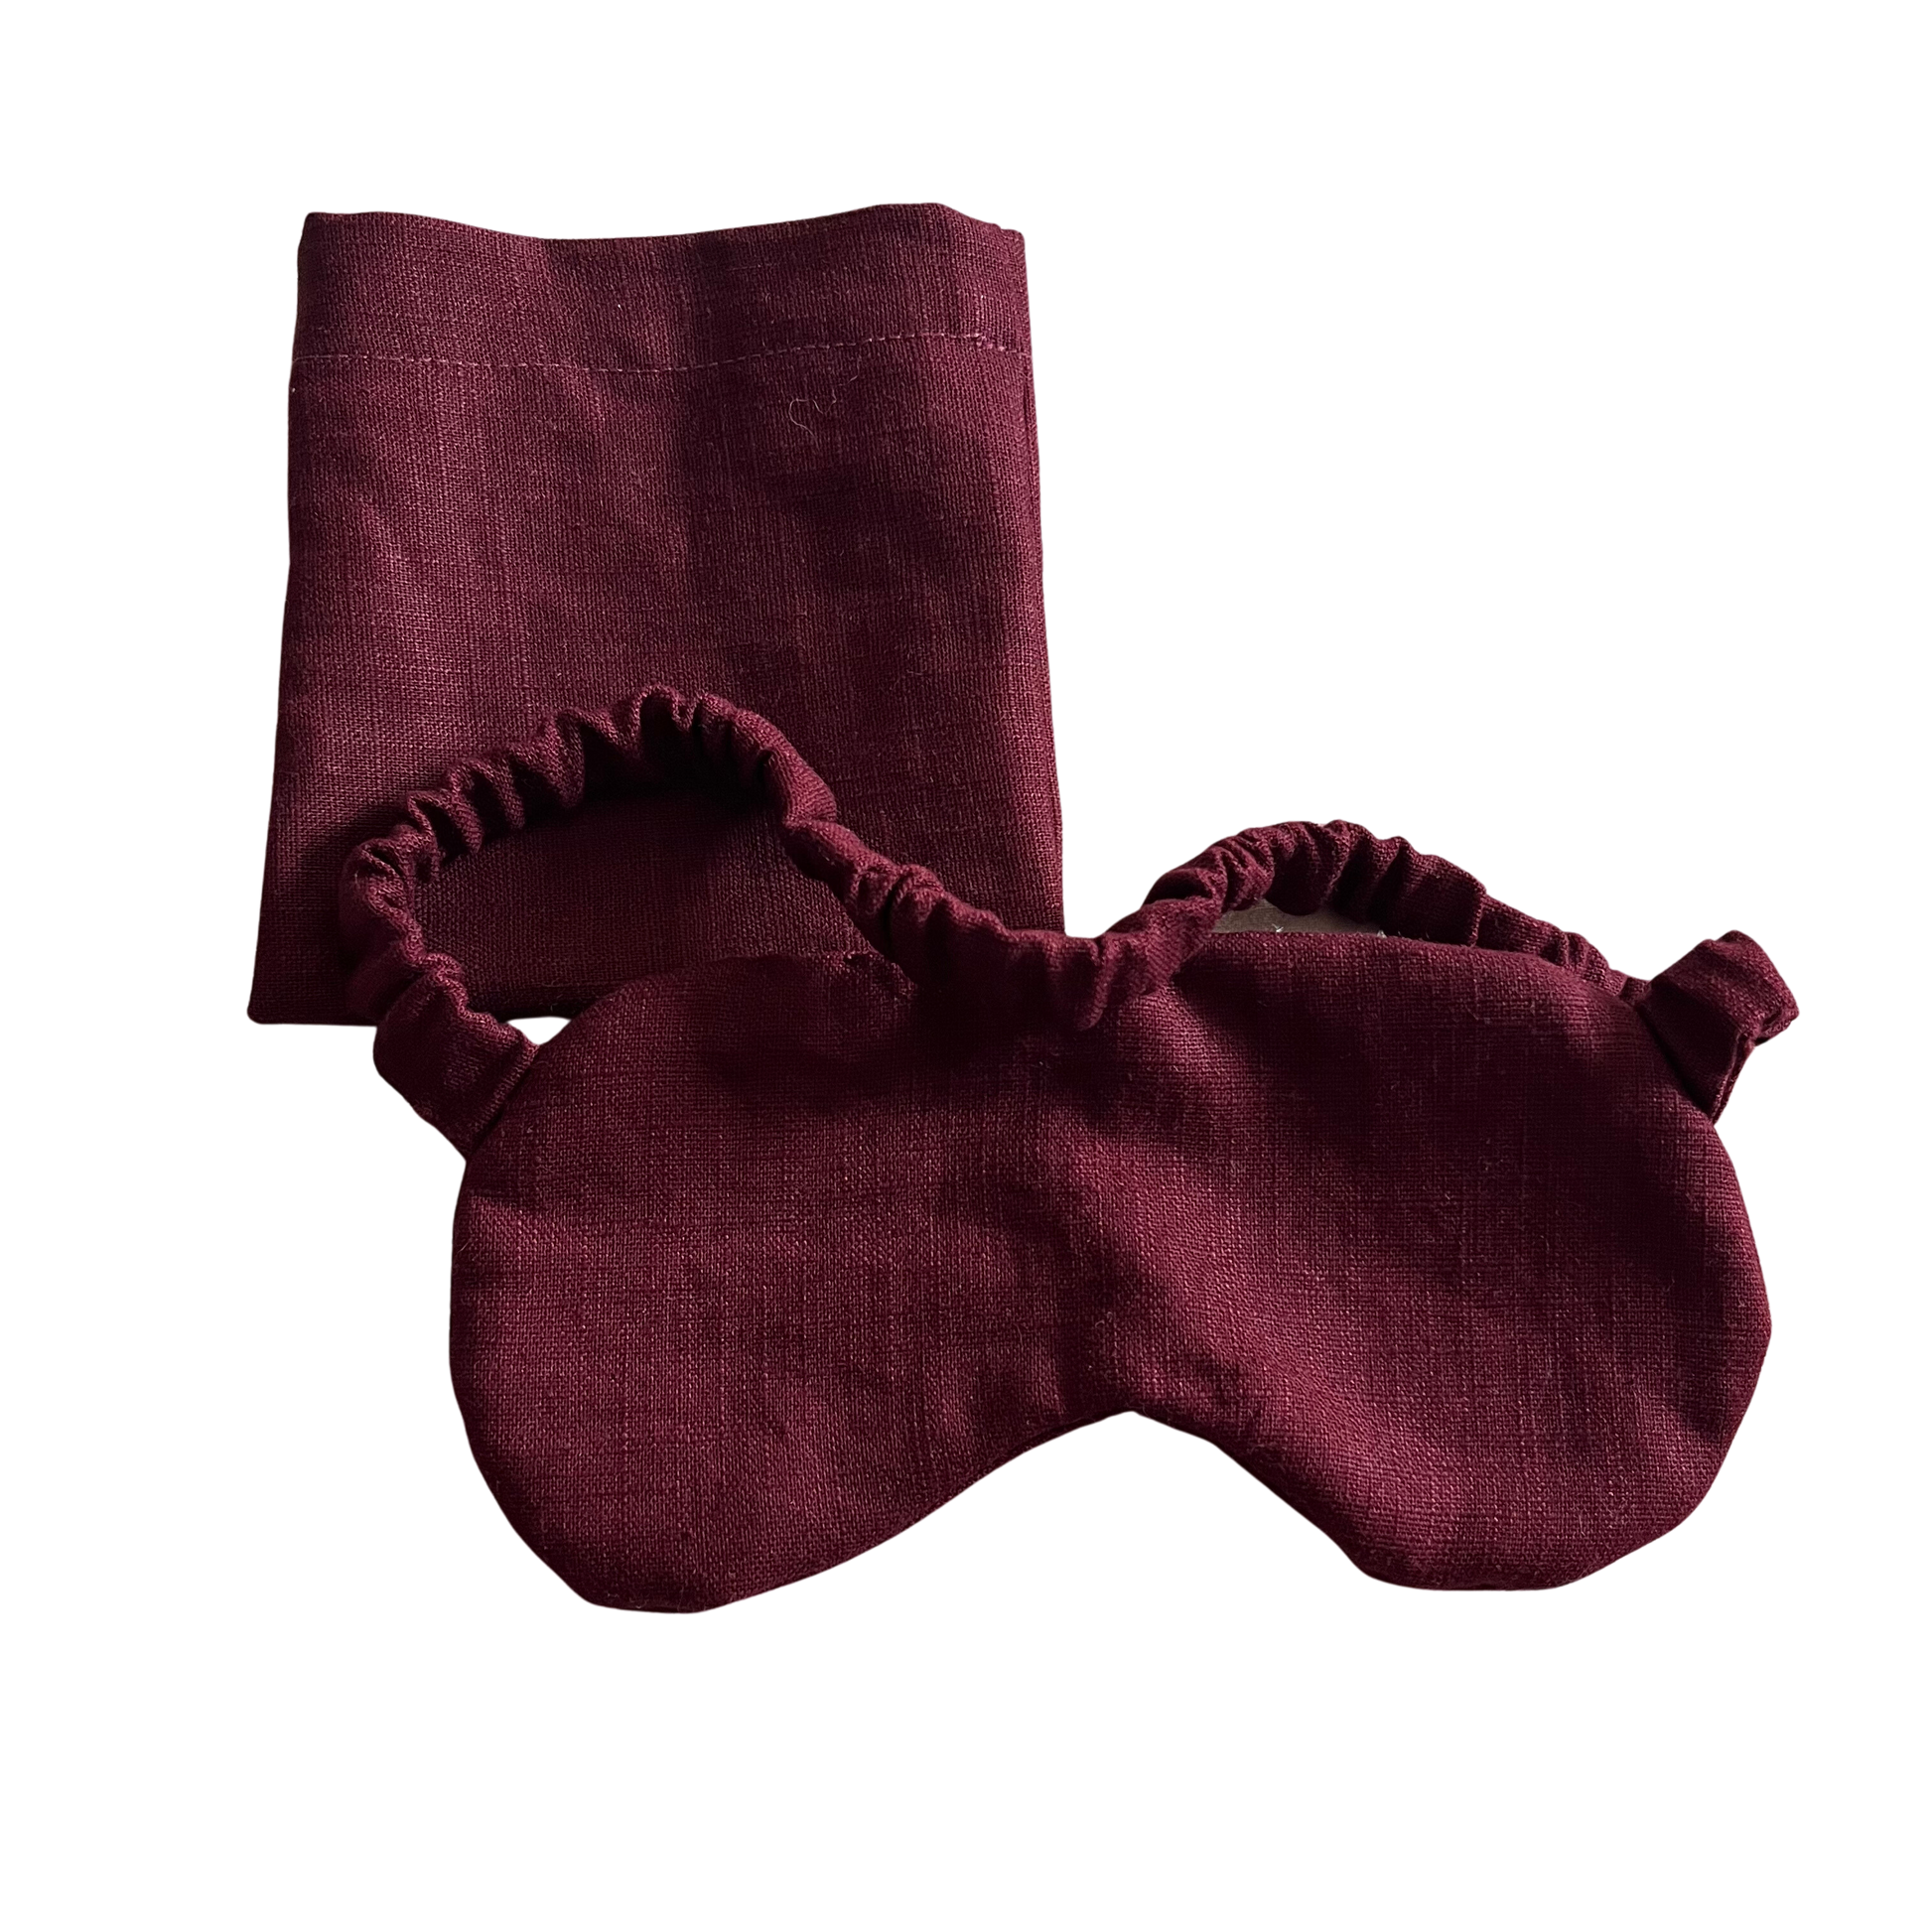 Washed linen sleep mask with keeper pouch - Mulberry red - Walker & Walker